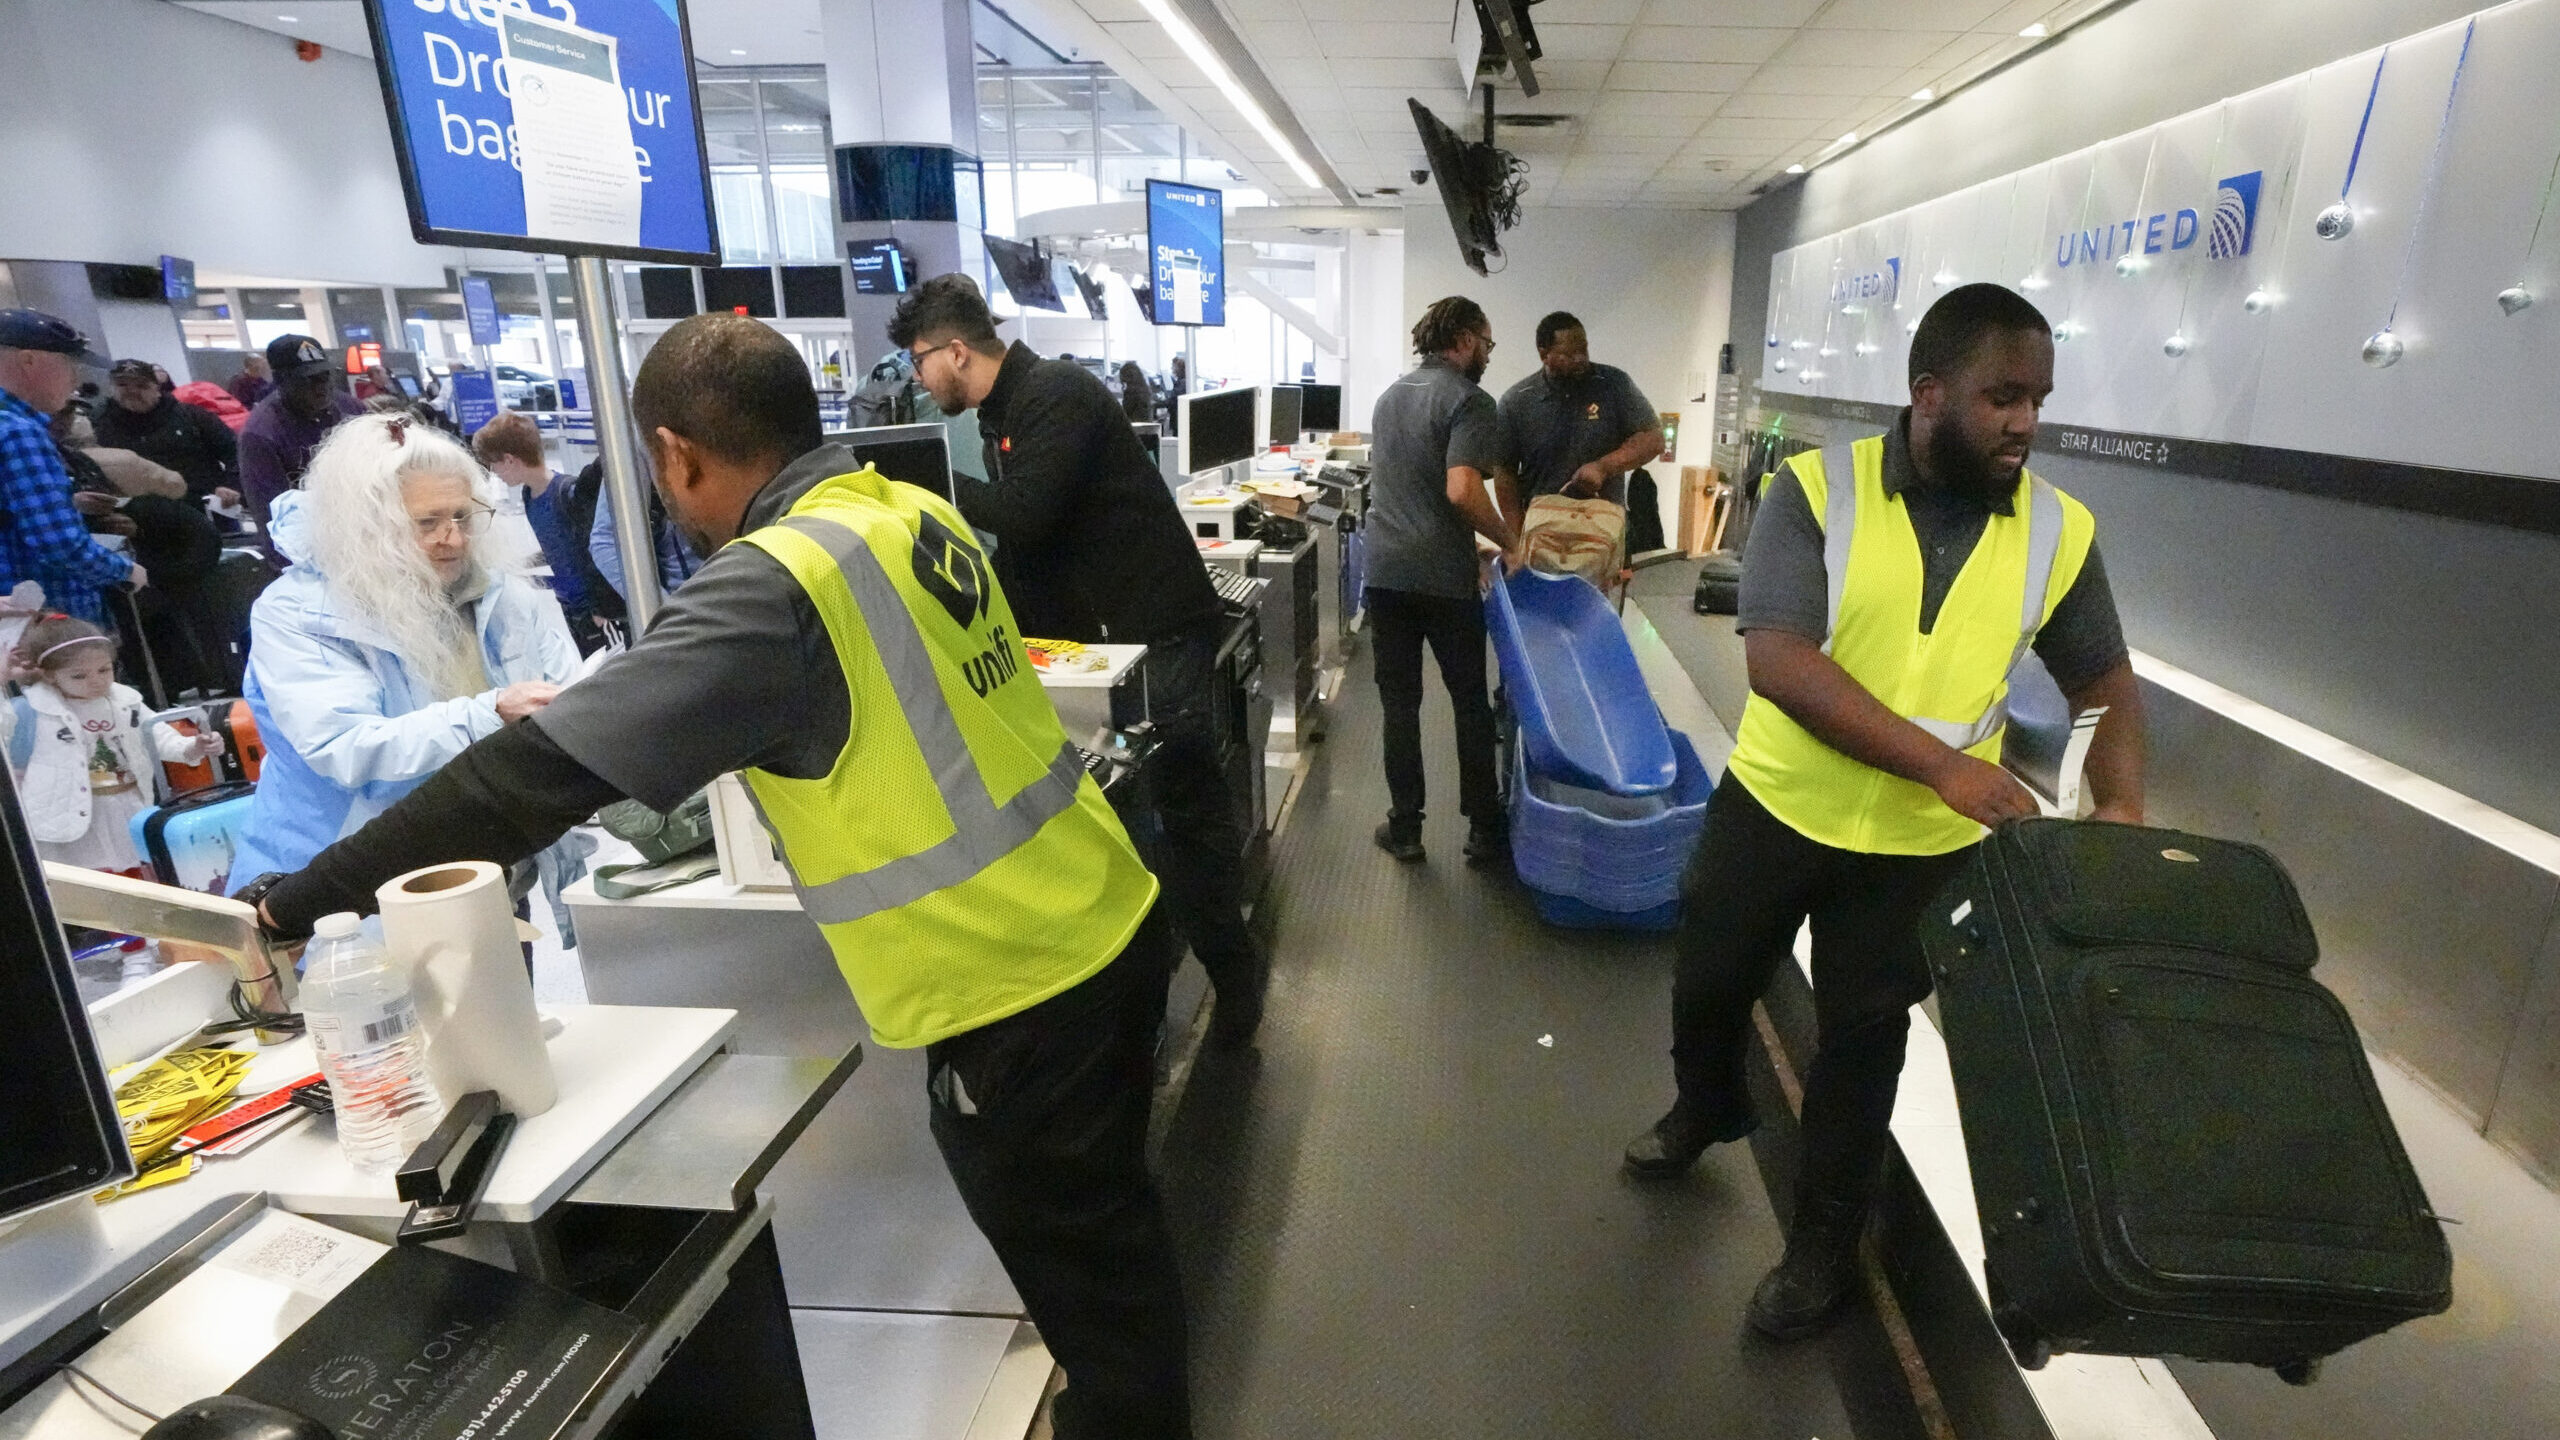 Passenger drop off their baggage at United Airlines in C Terminal at George Bush Intercontinental A...